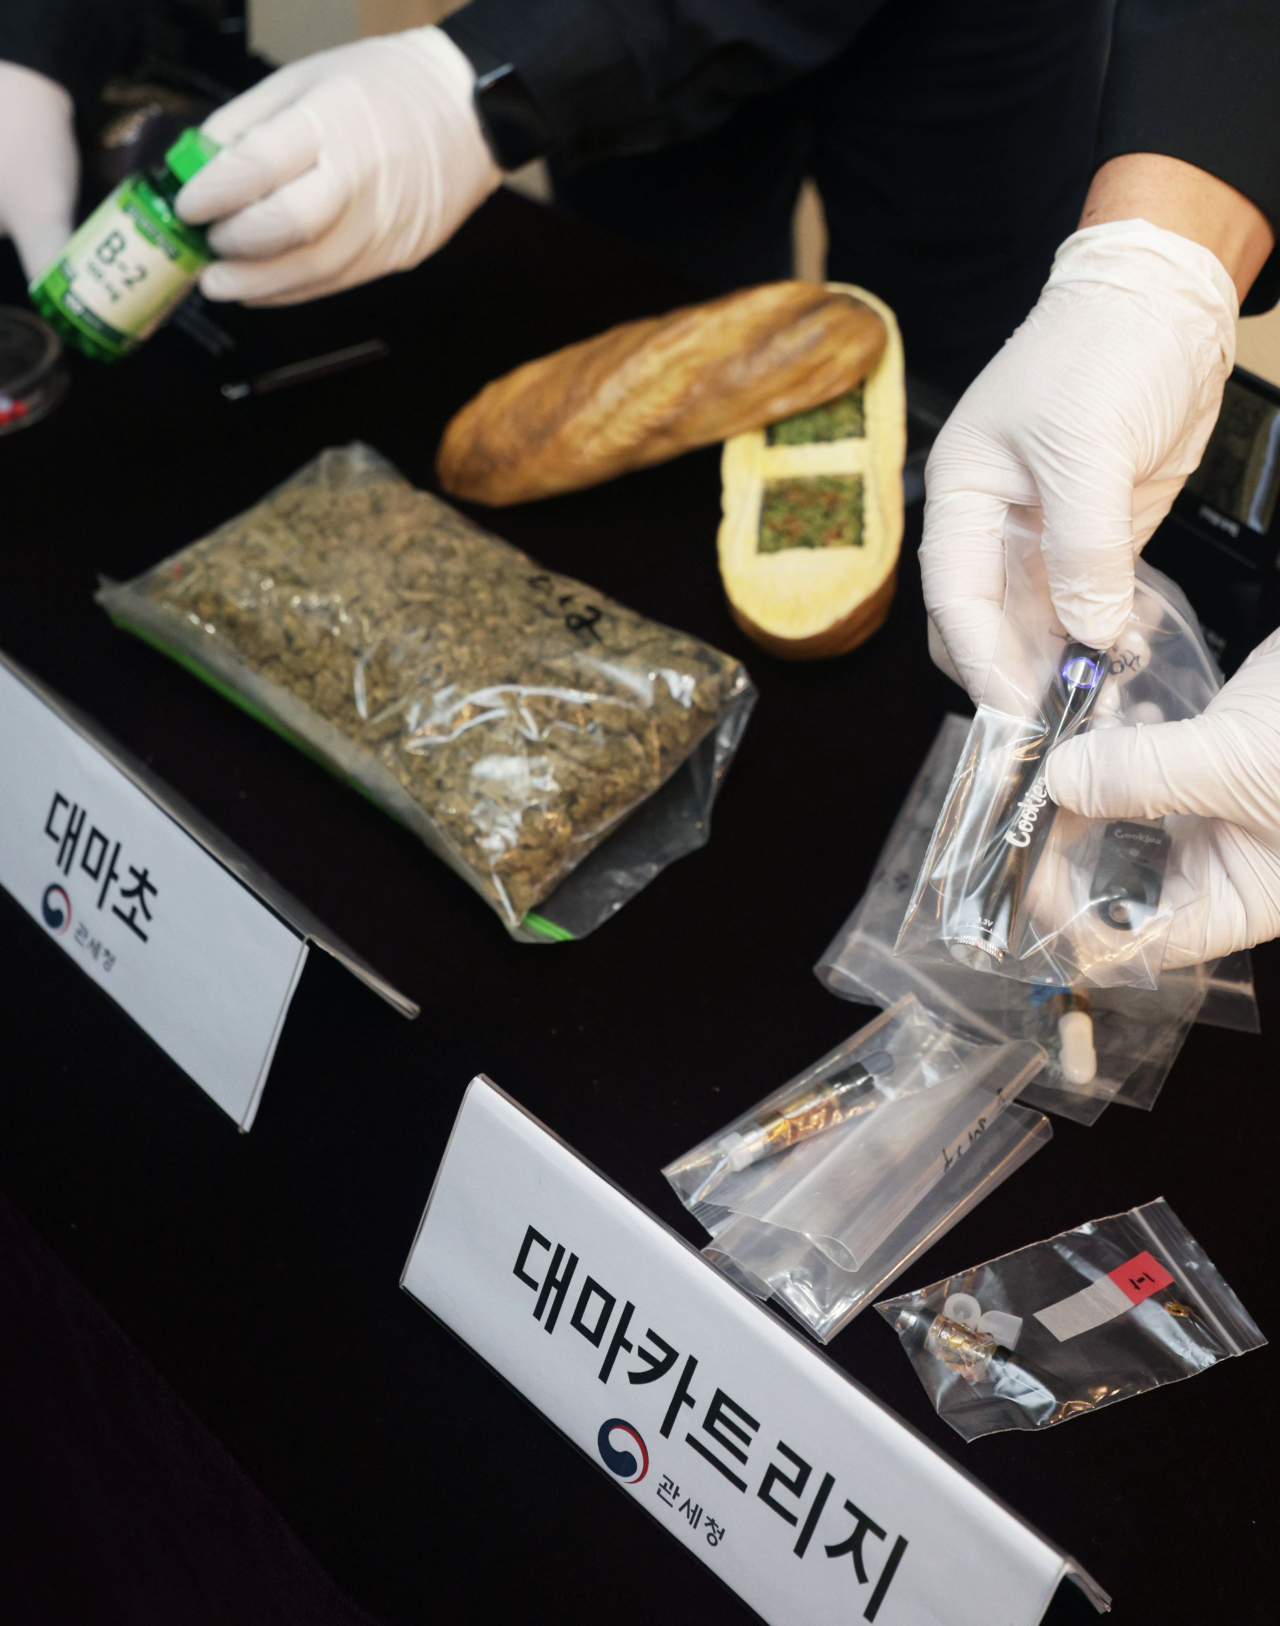 South Korean customs officers show confiscated cannabis and cannabis vape cartridges at a press briefing held at Seoul Central Customs headquarters on Thursday. (Yonhap)